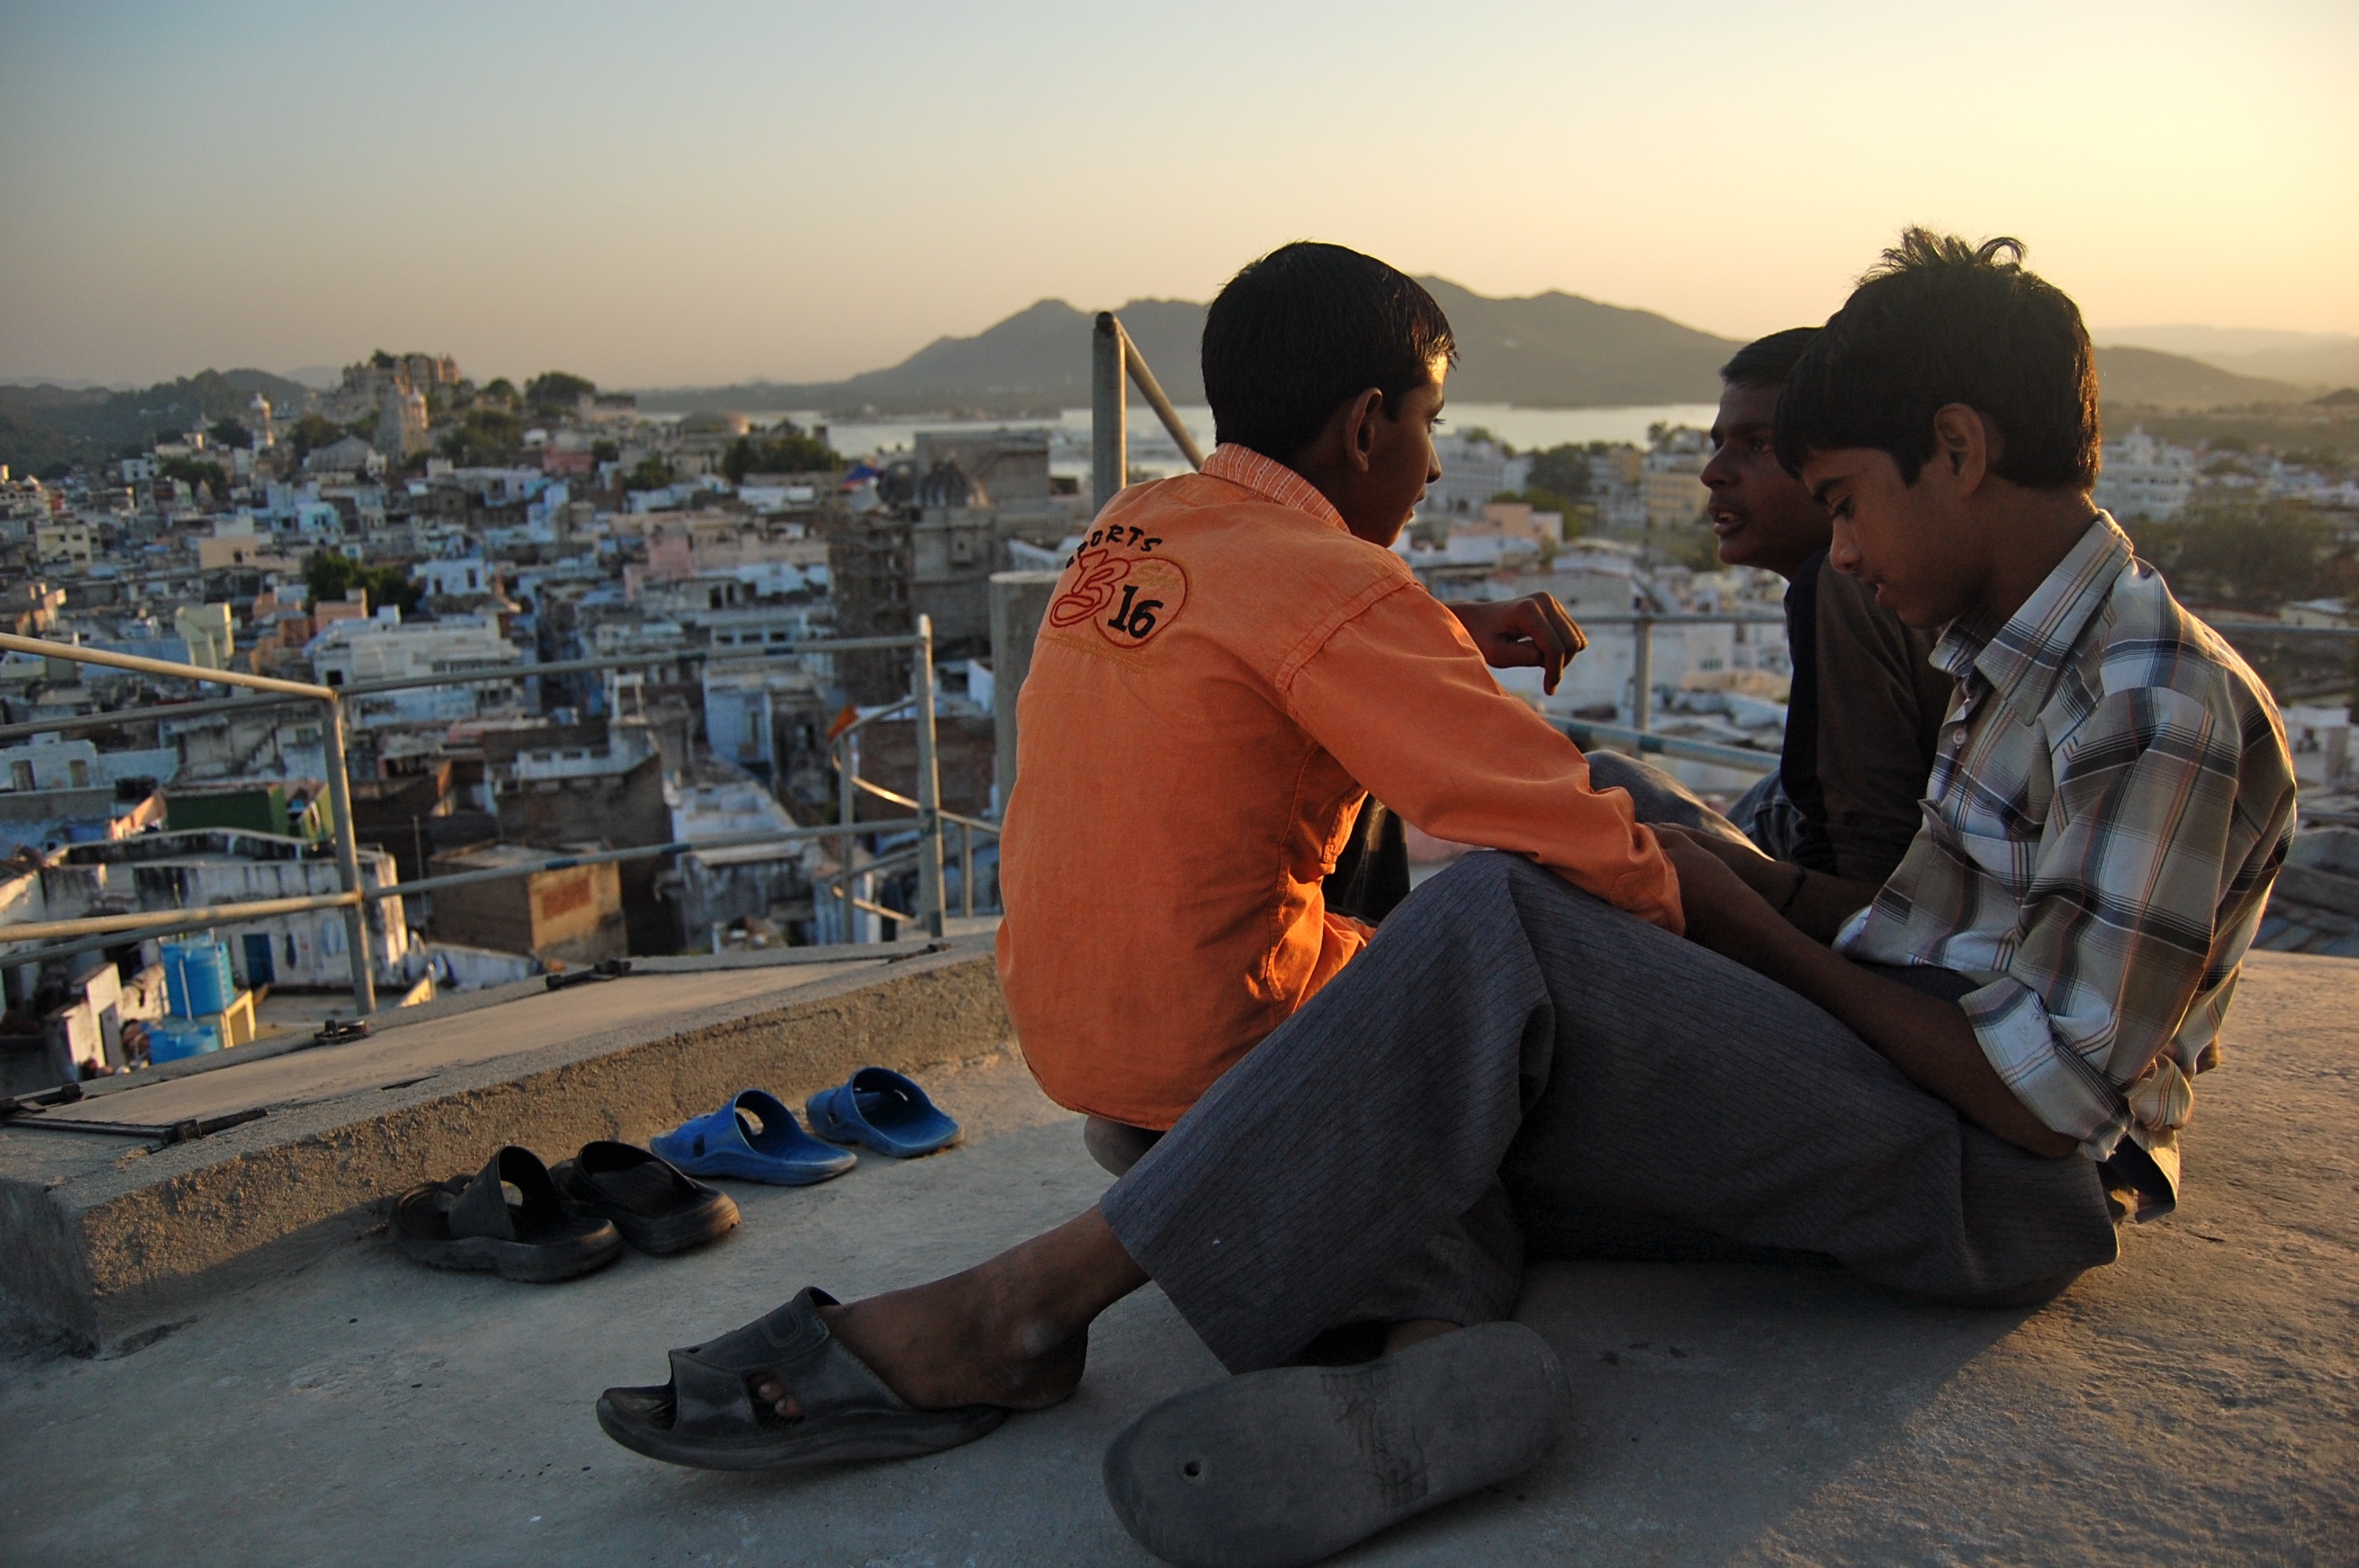 Sunset from the water tower, Udaipur, India